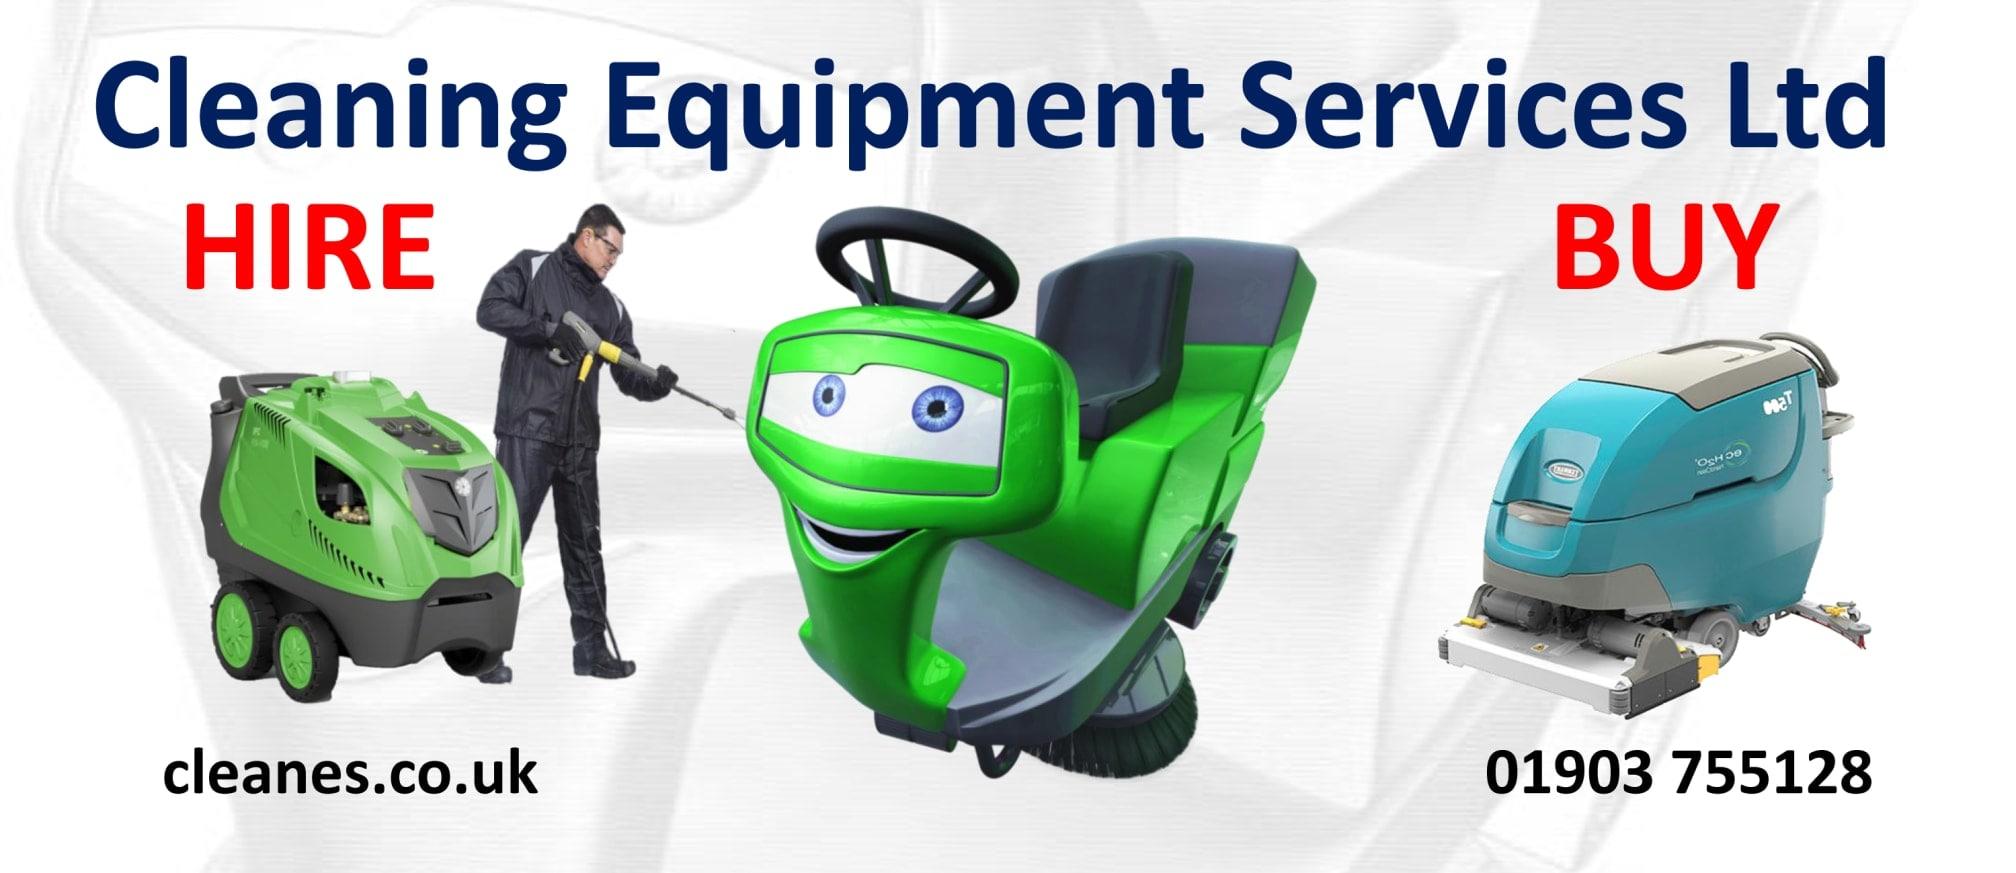 Images Cleaning Equipment Services Ltd